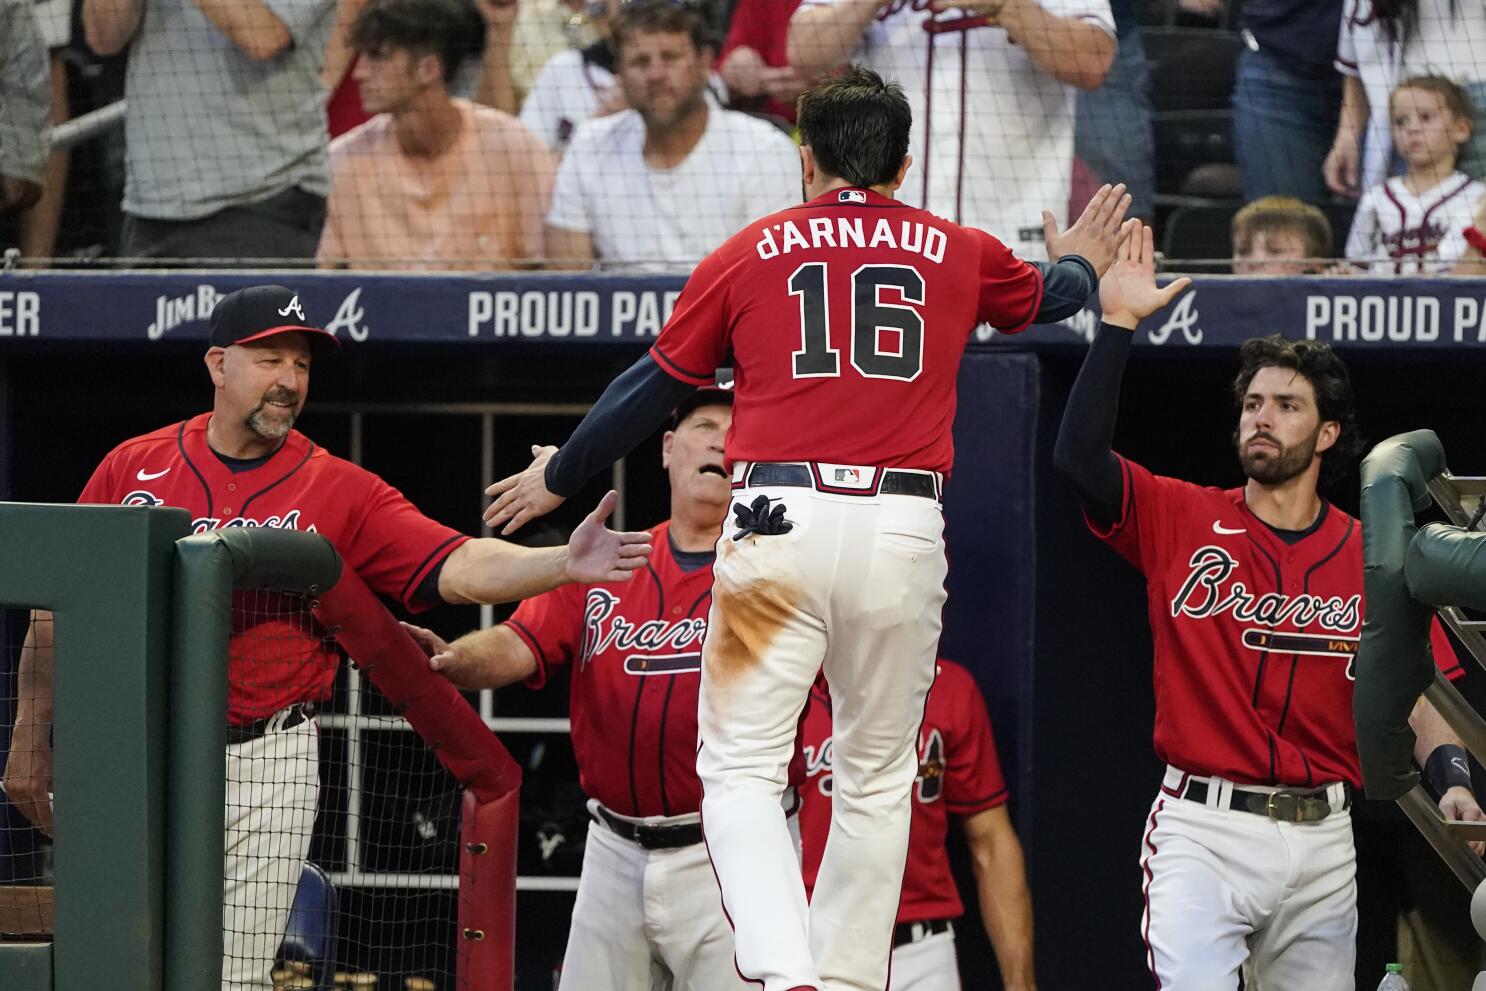 Seiya Suzuki robs first homer, Dansby Swanson hits two to power